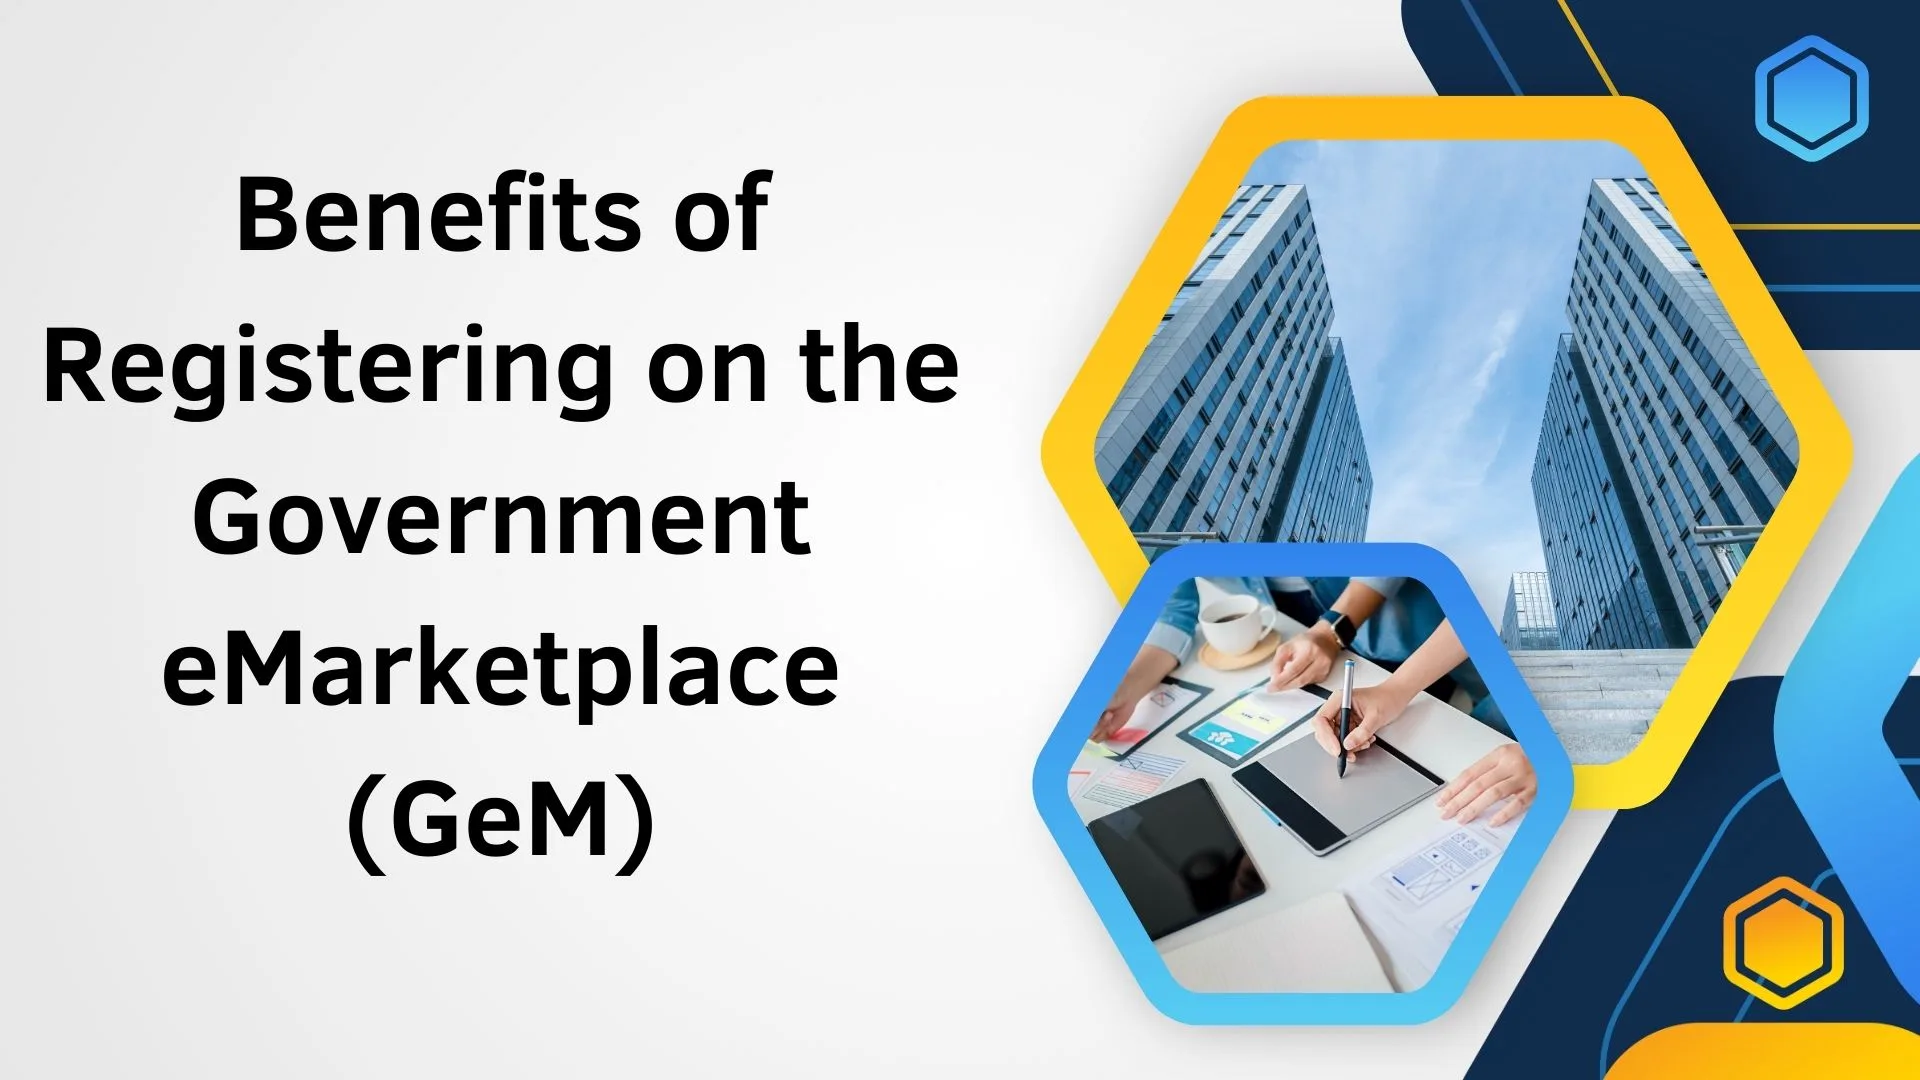 Benefits of Registering on the Government eMarketplace (GeM)